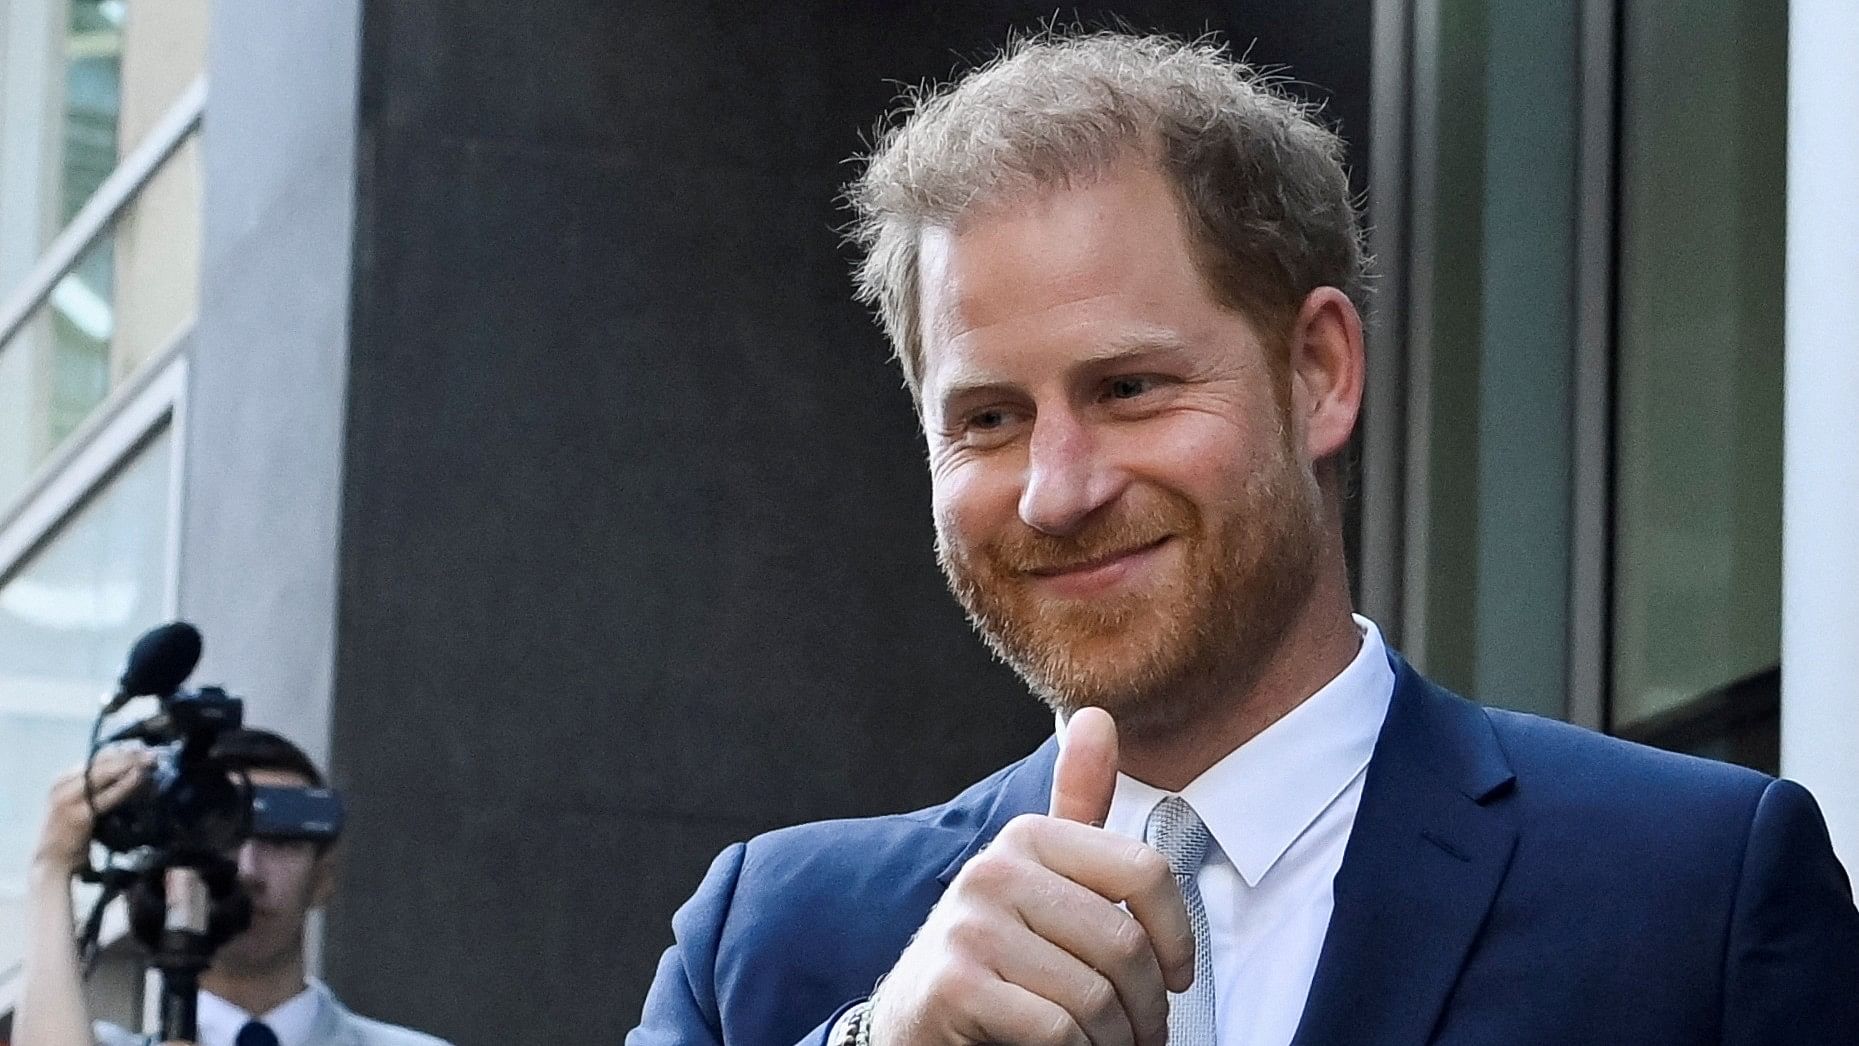 <div class="paragraphs"><p>Prince Harry gestures as he departs the Rolls Building of the High Court in London, Britain.</p></div>